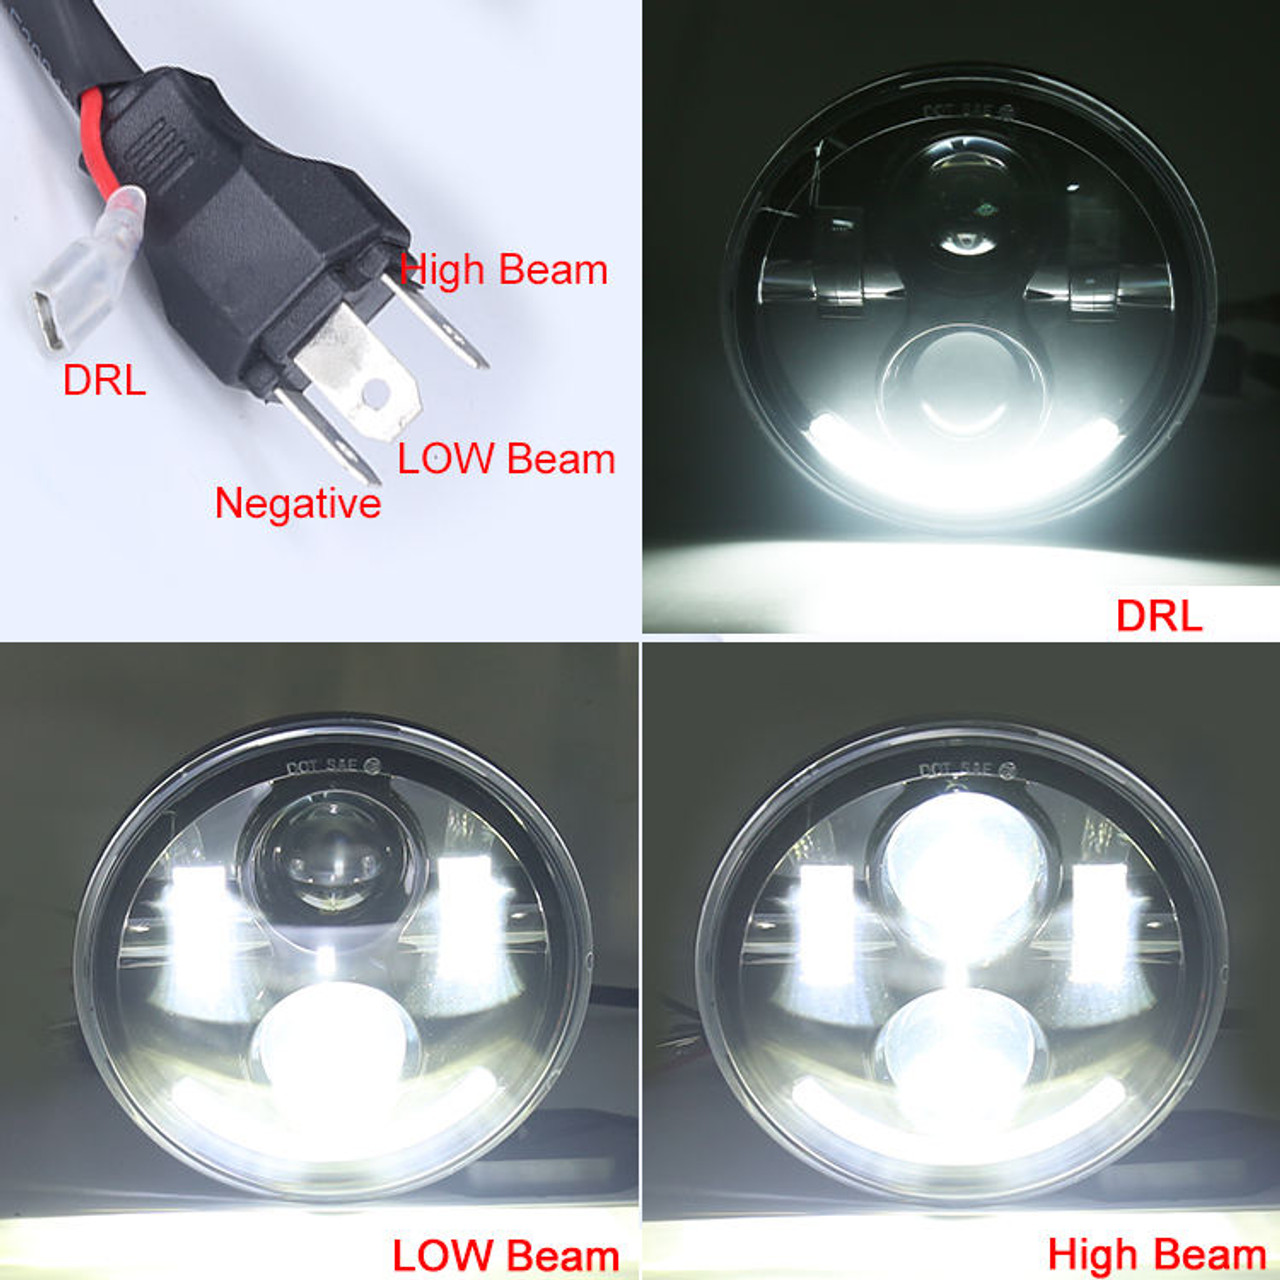 5.75 LED Headlight for Motorcycle with Multi-color DRL